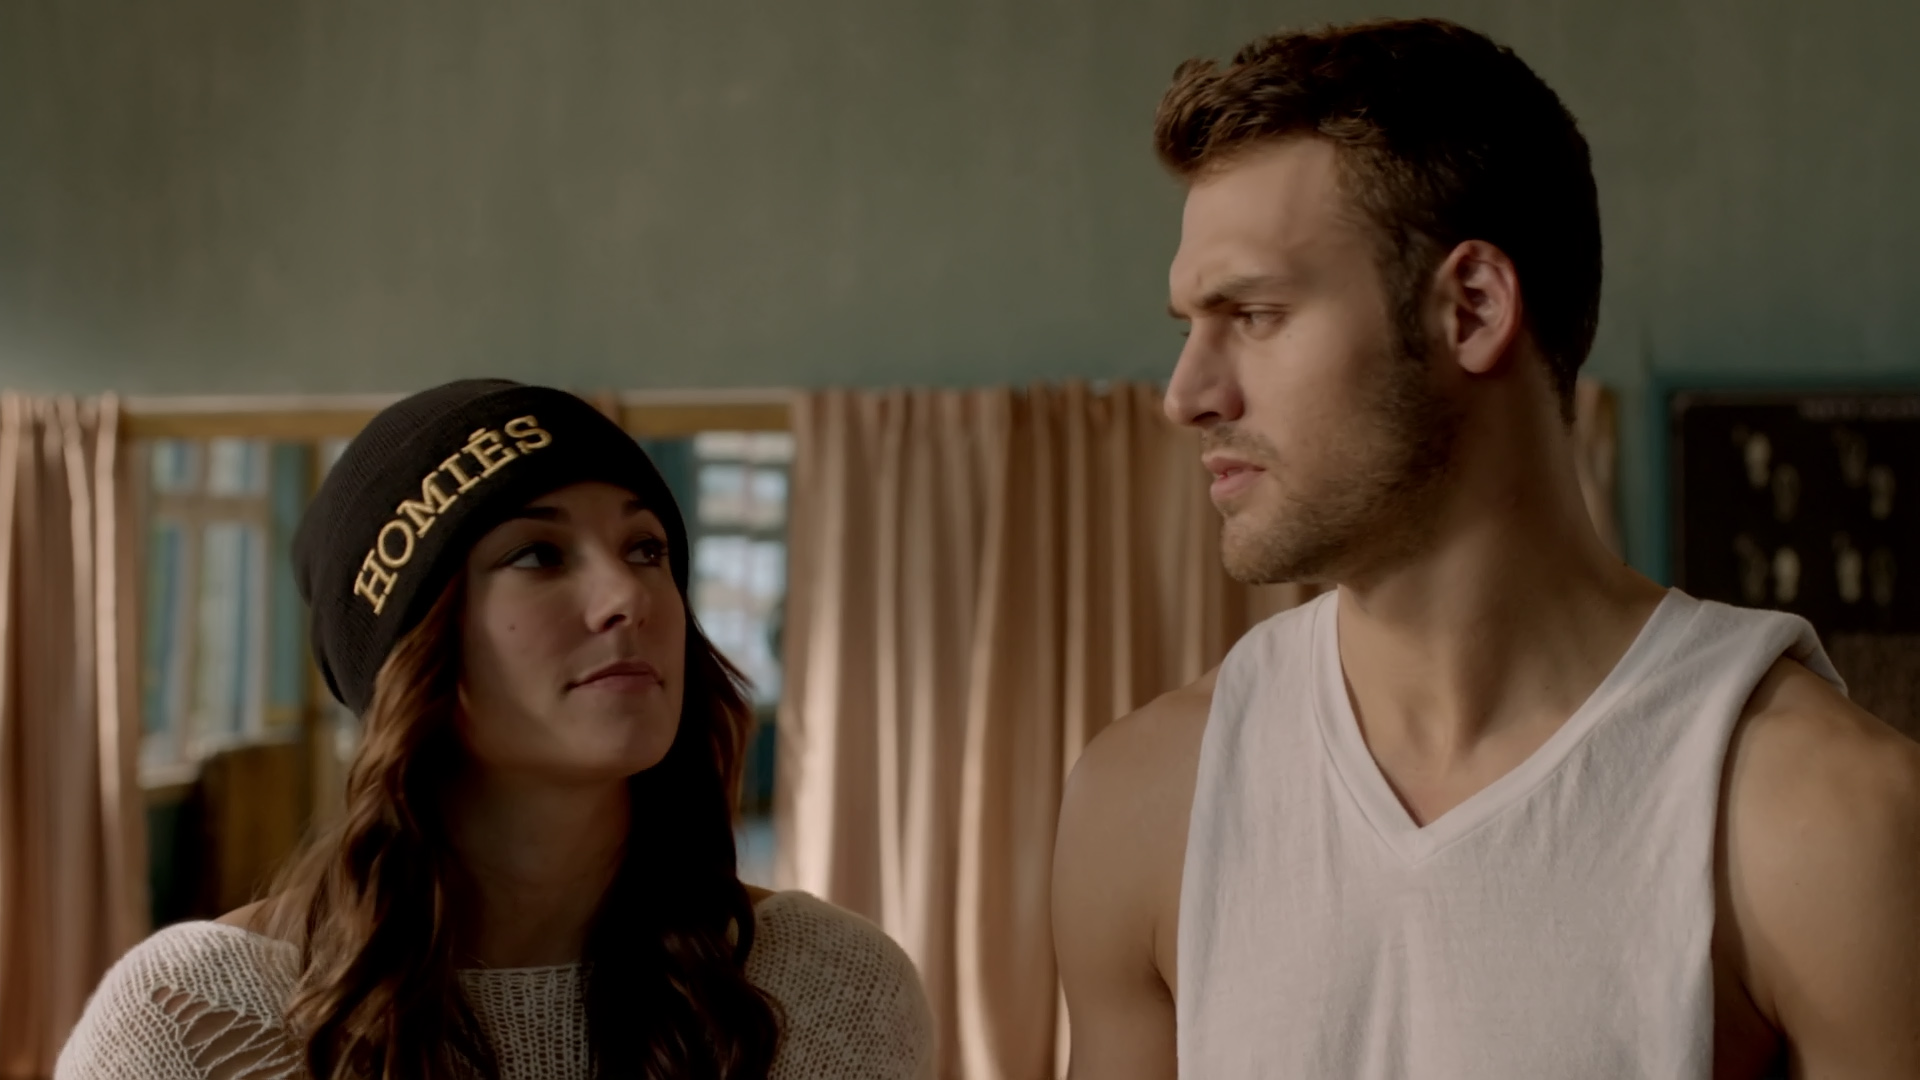 “Who will be in charge?” “I AM” – Briana Evigan and Ryan Guzman